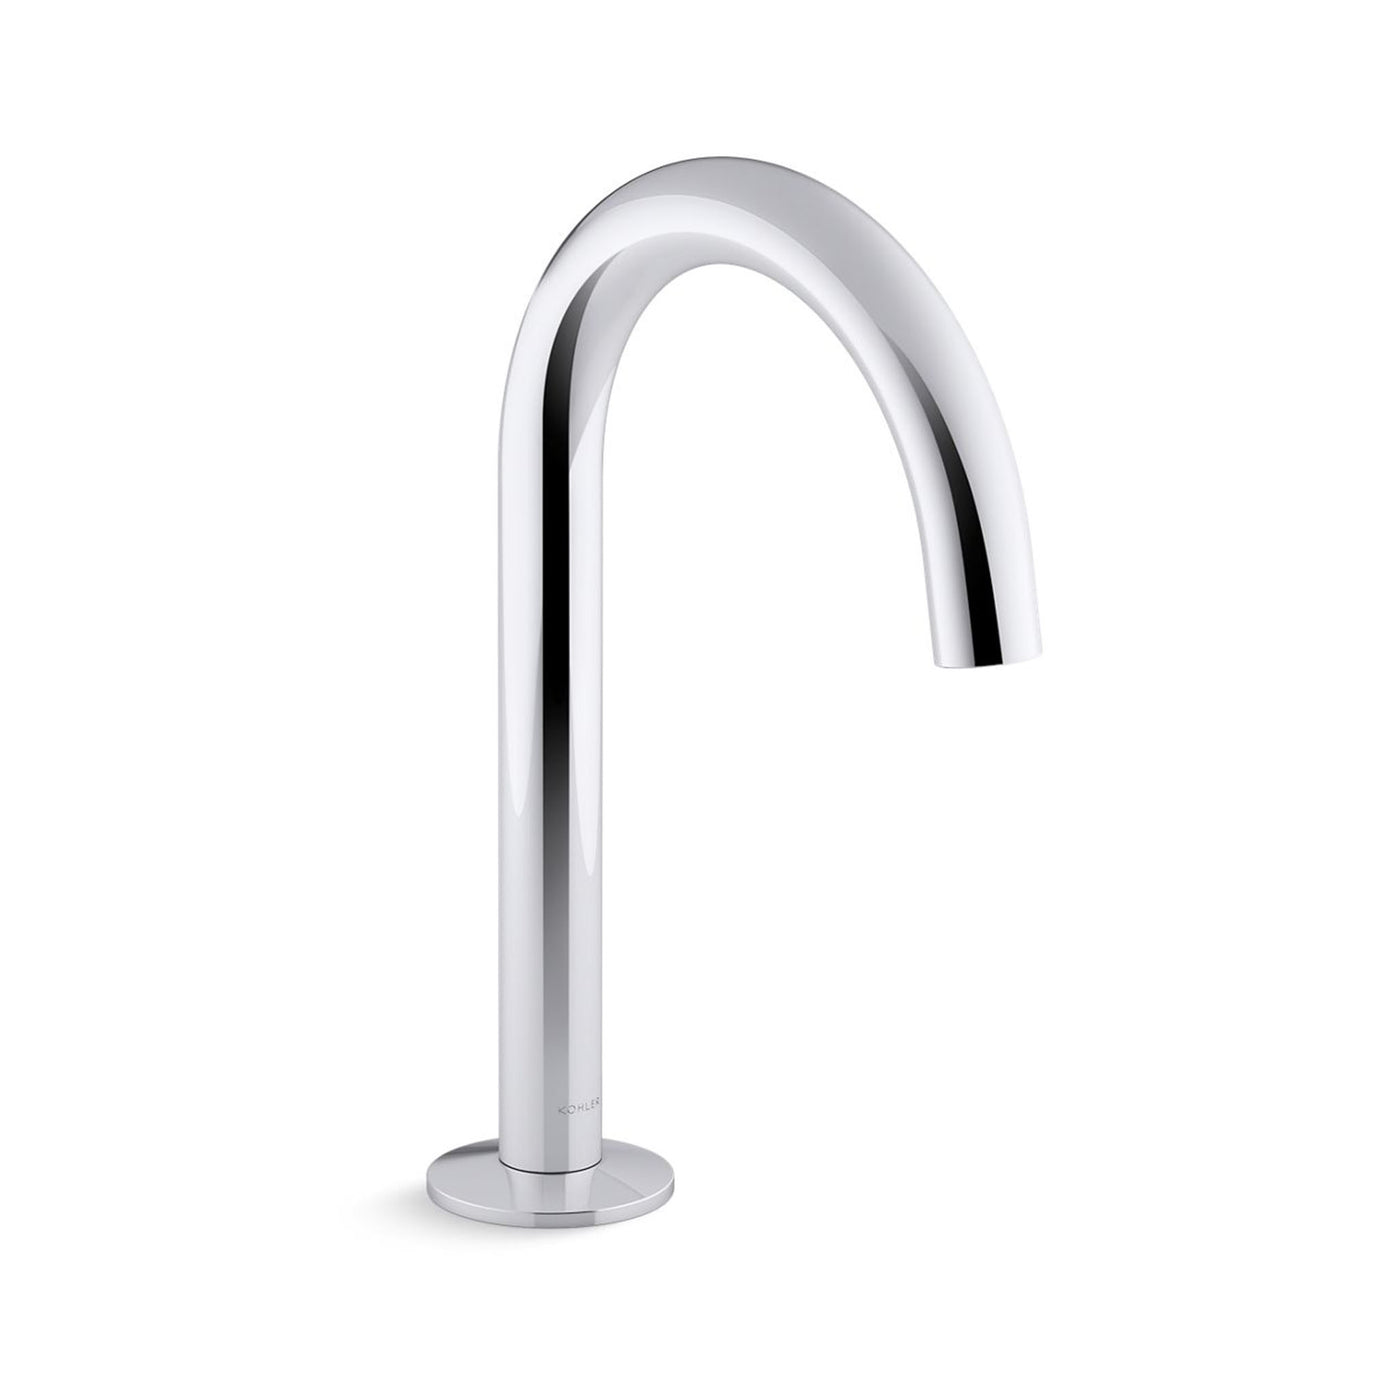 Components® Bathroom sink spout with Tube design, 1.2 gpm